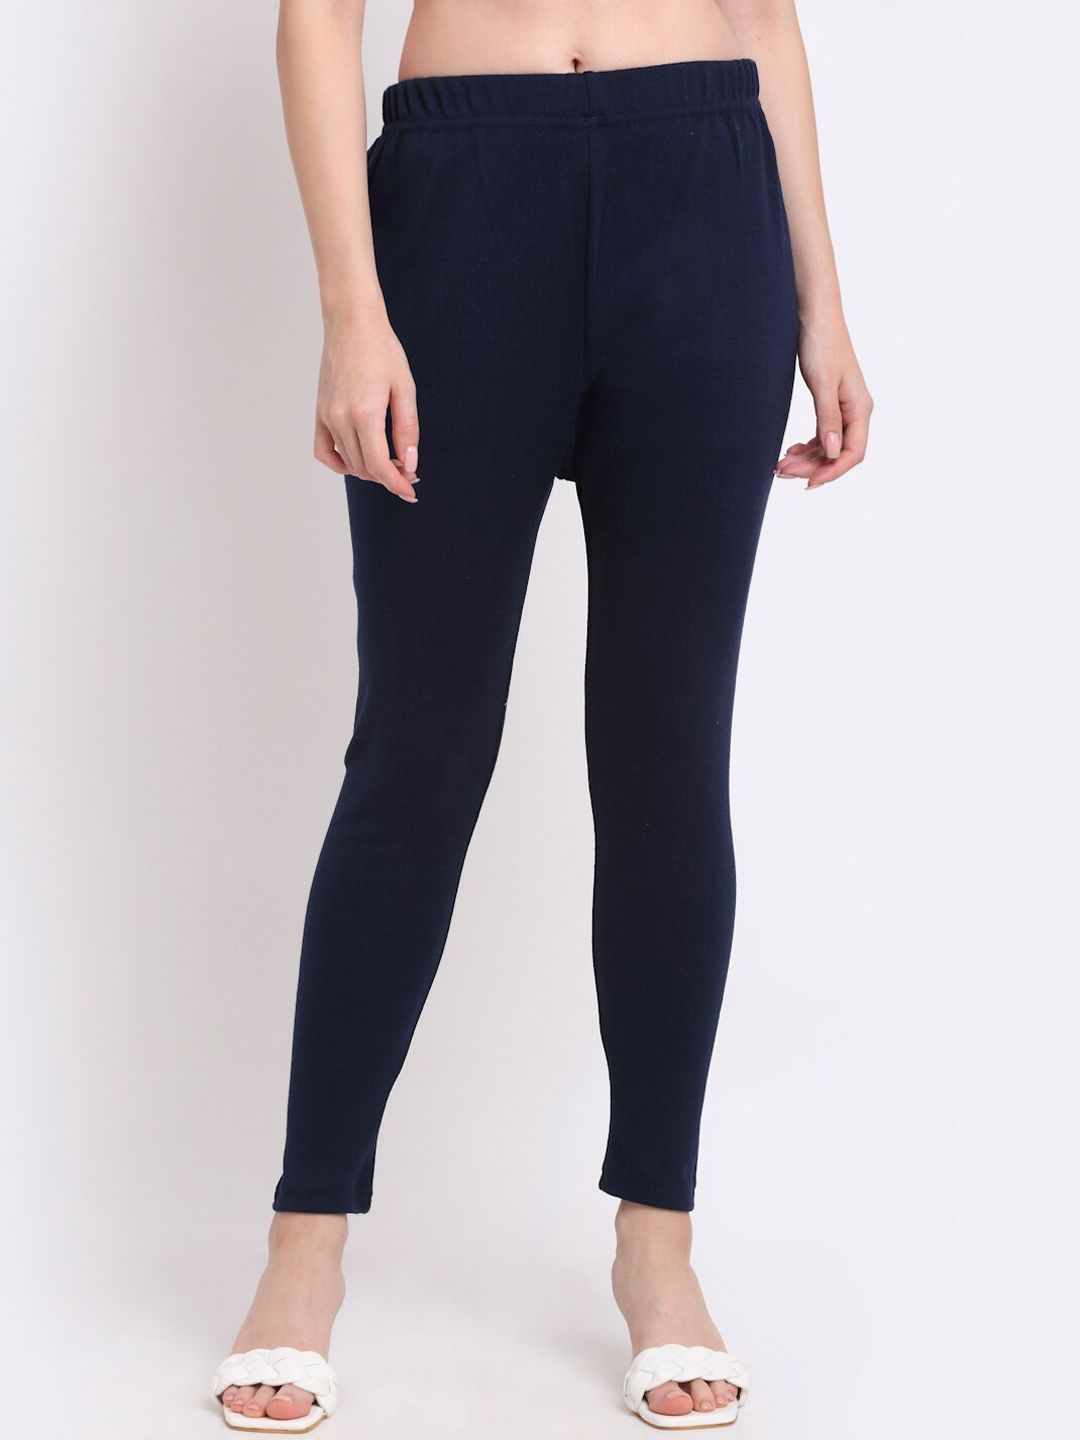 TAG 7 Women Navy-Blue Woolen Ankle-Length Leggings Price in India